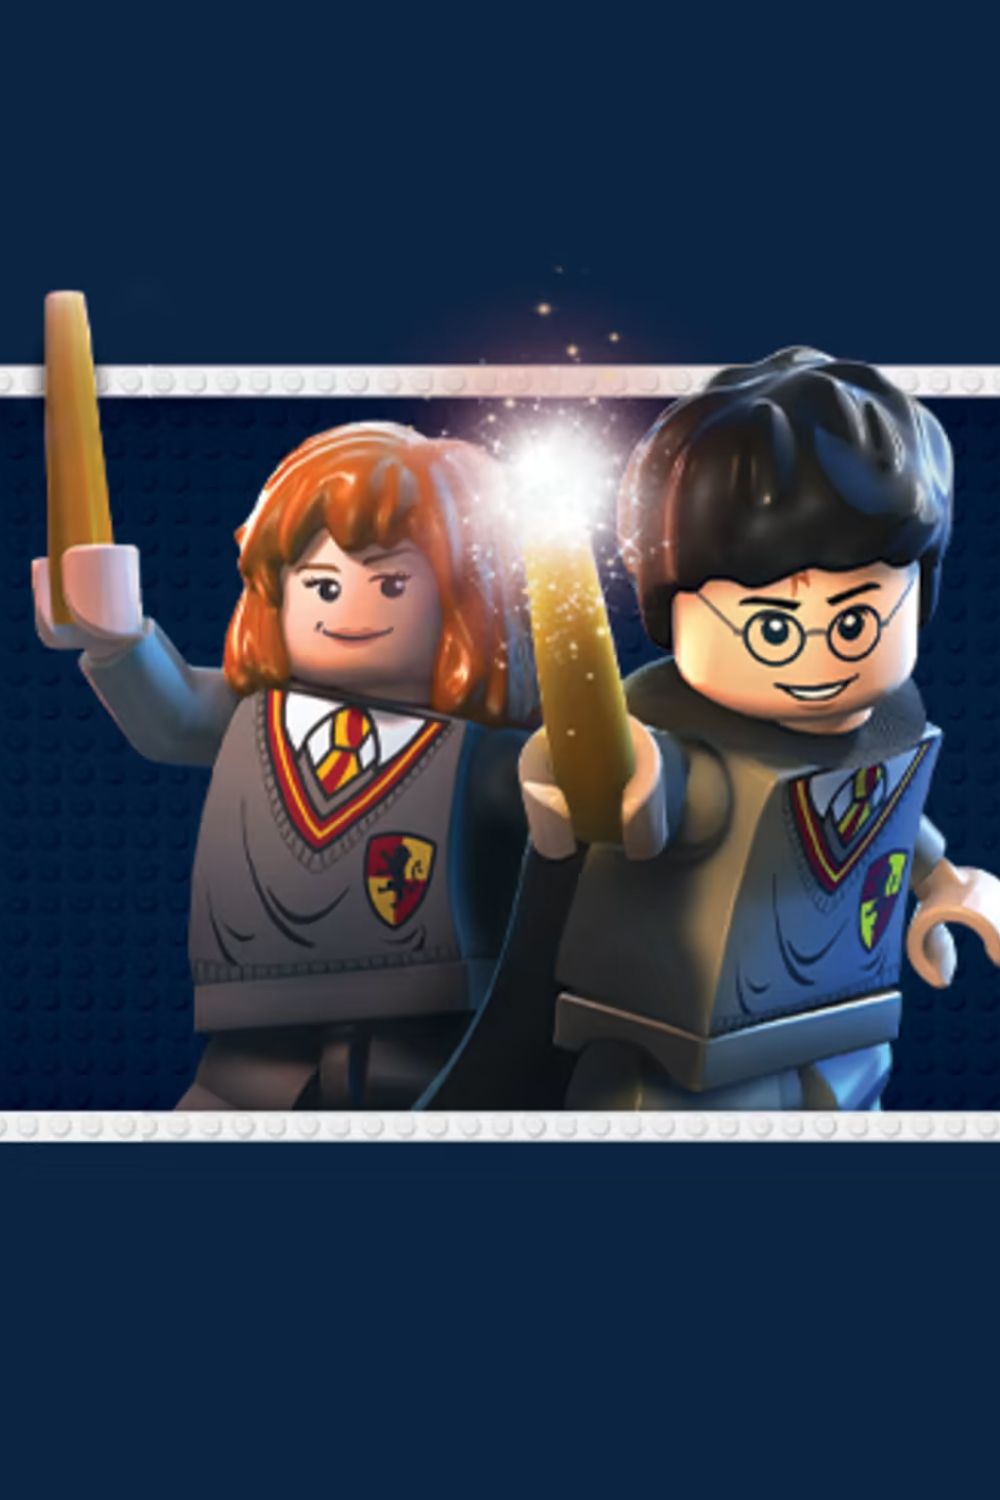 LEGO Harry Potter game